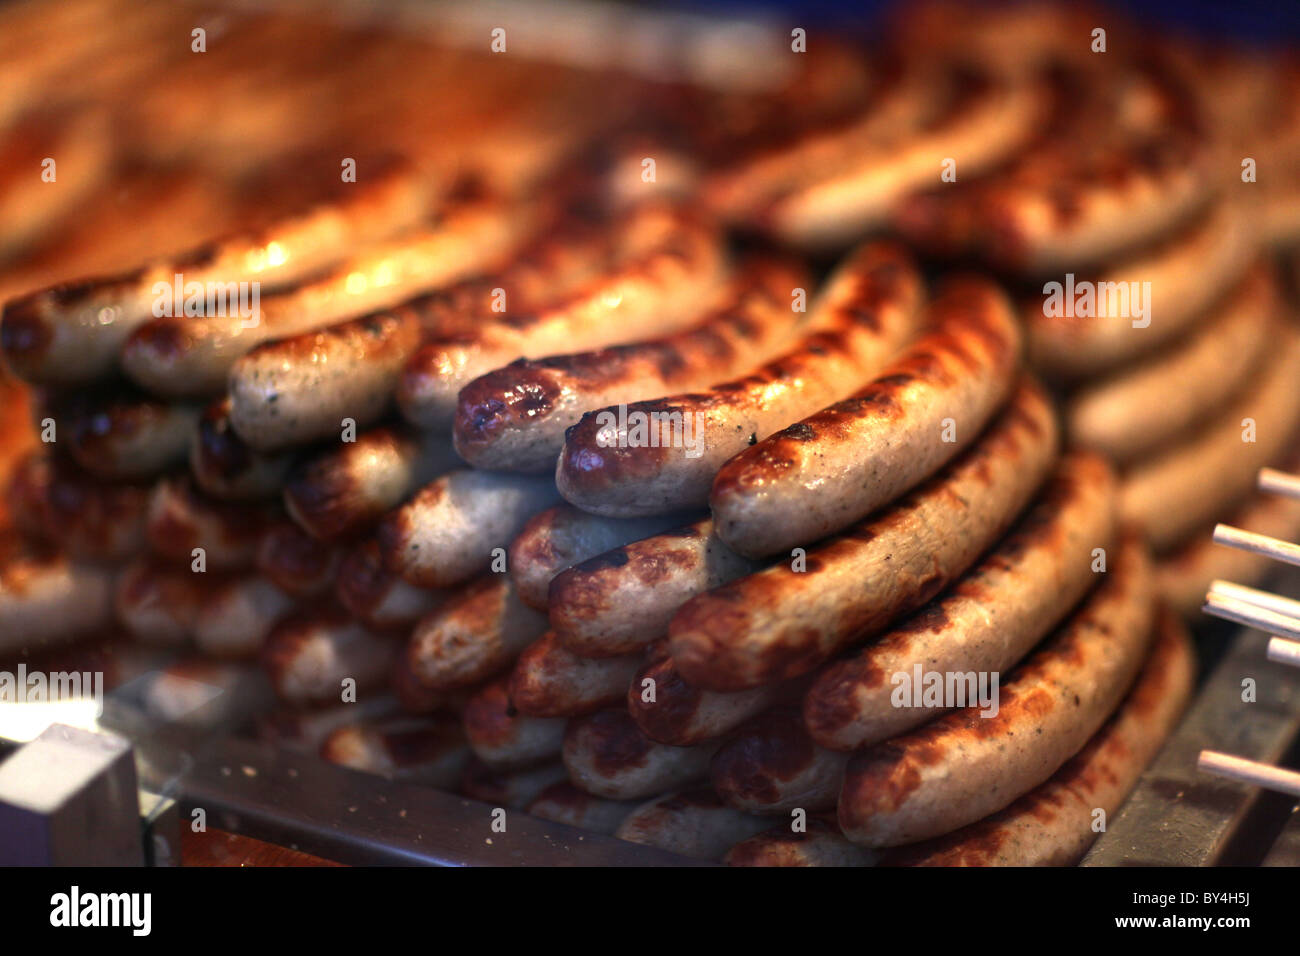 Sausages or brattwurst on display in a Christmas market in central Berlin, Germany. Stock Photo